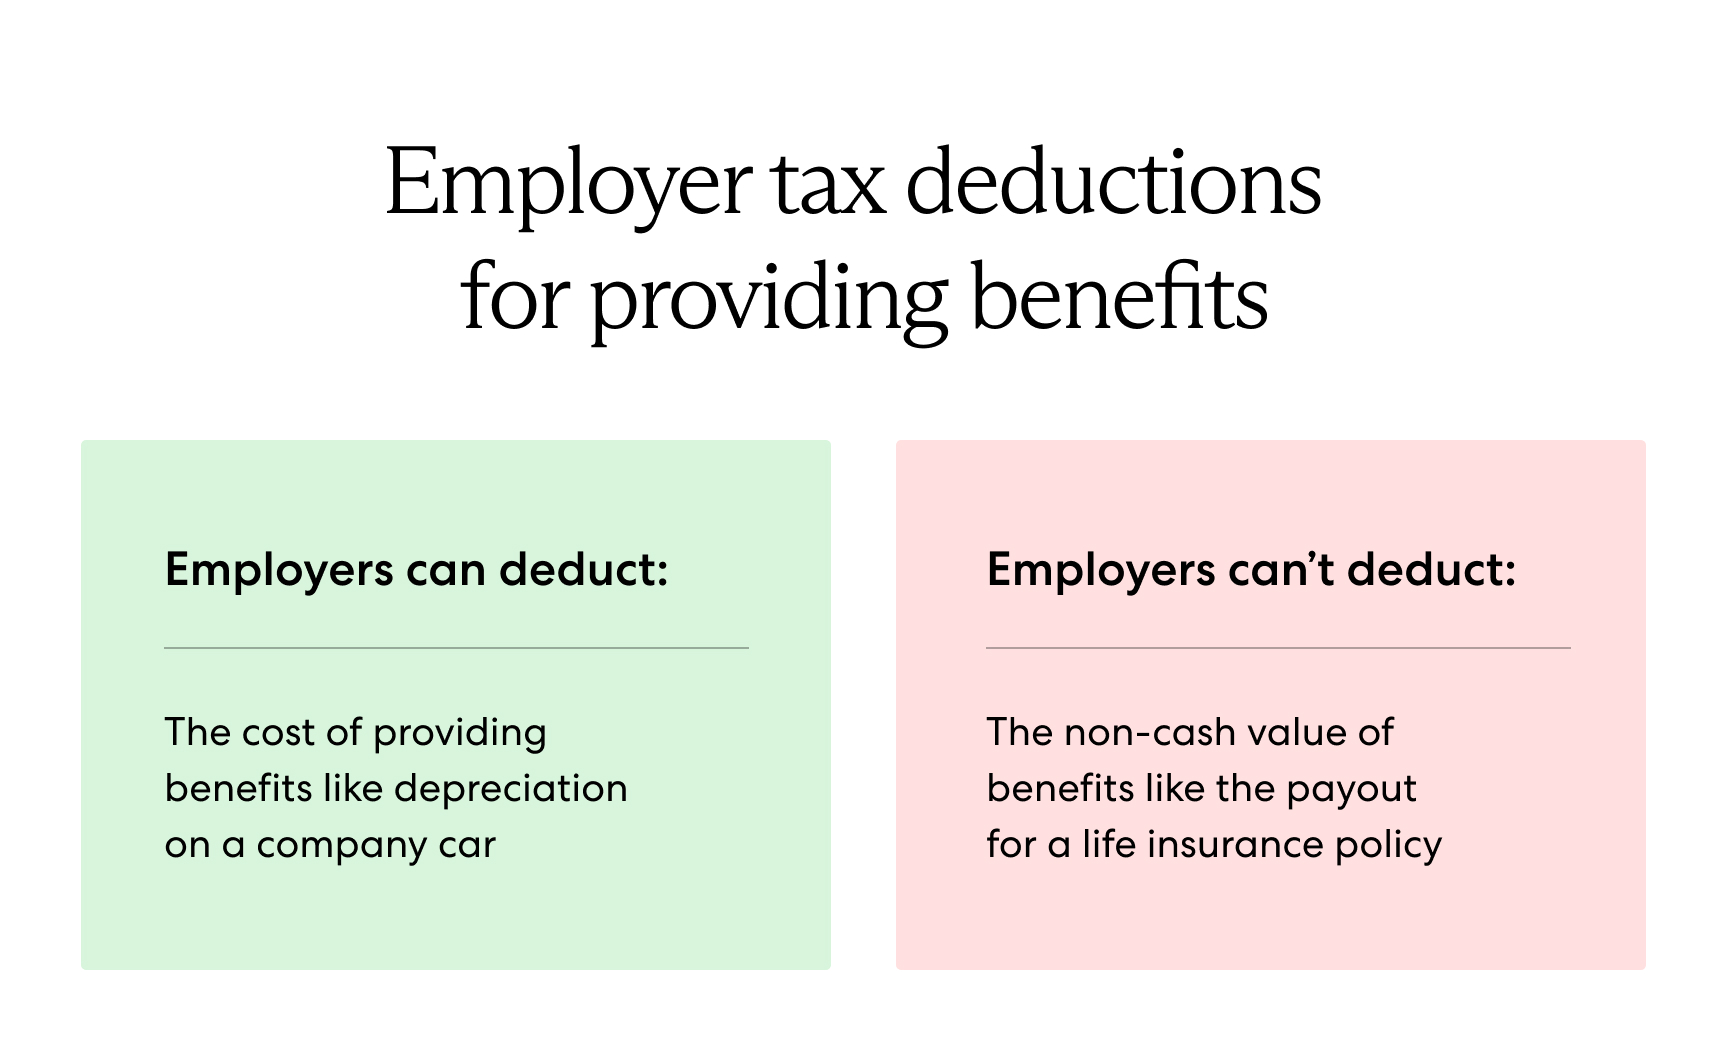 Employers can deduct the cost of providing benefits (like depreciation on a company car) but not the non-cash value of benefits (like the payout of a life insurance policy).